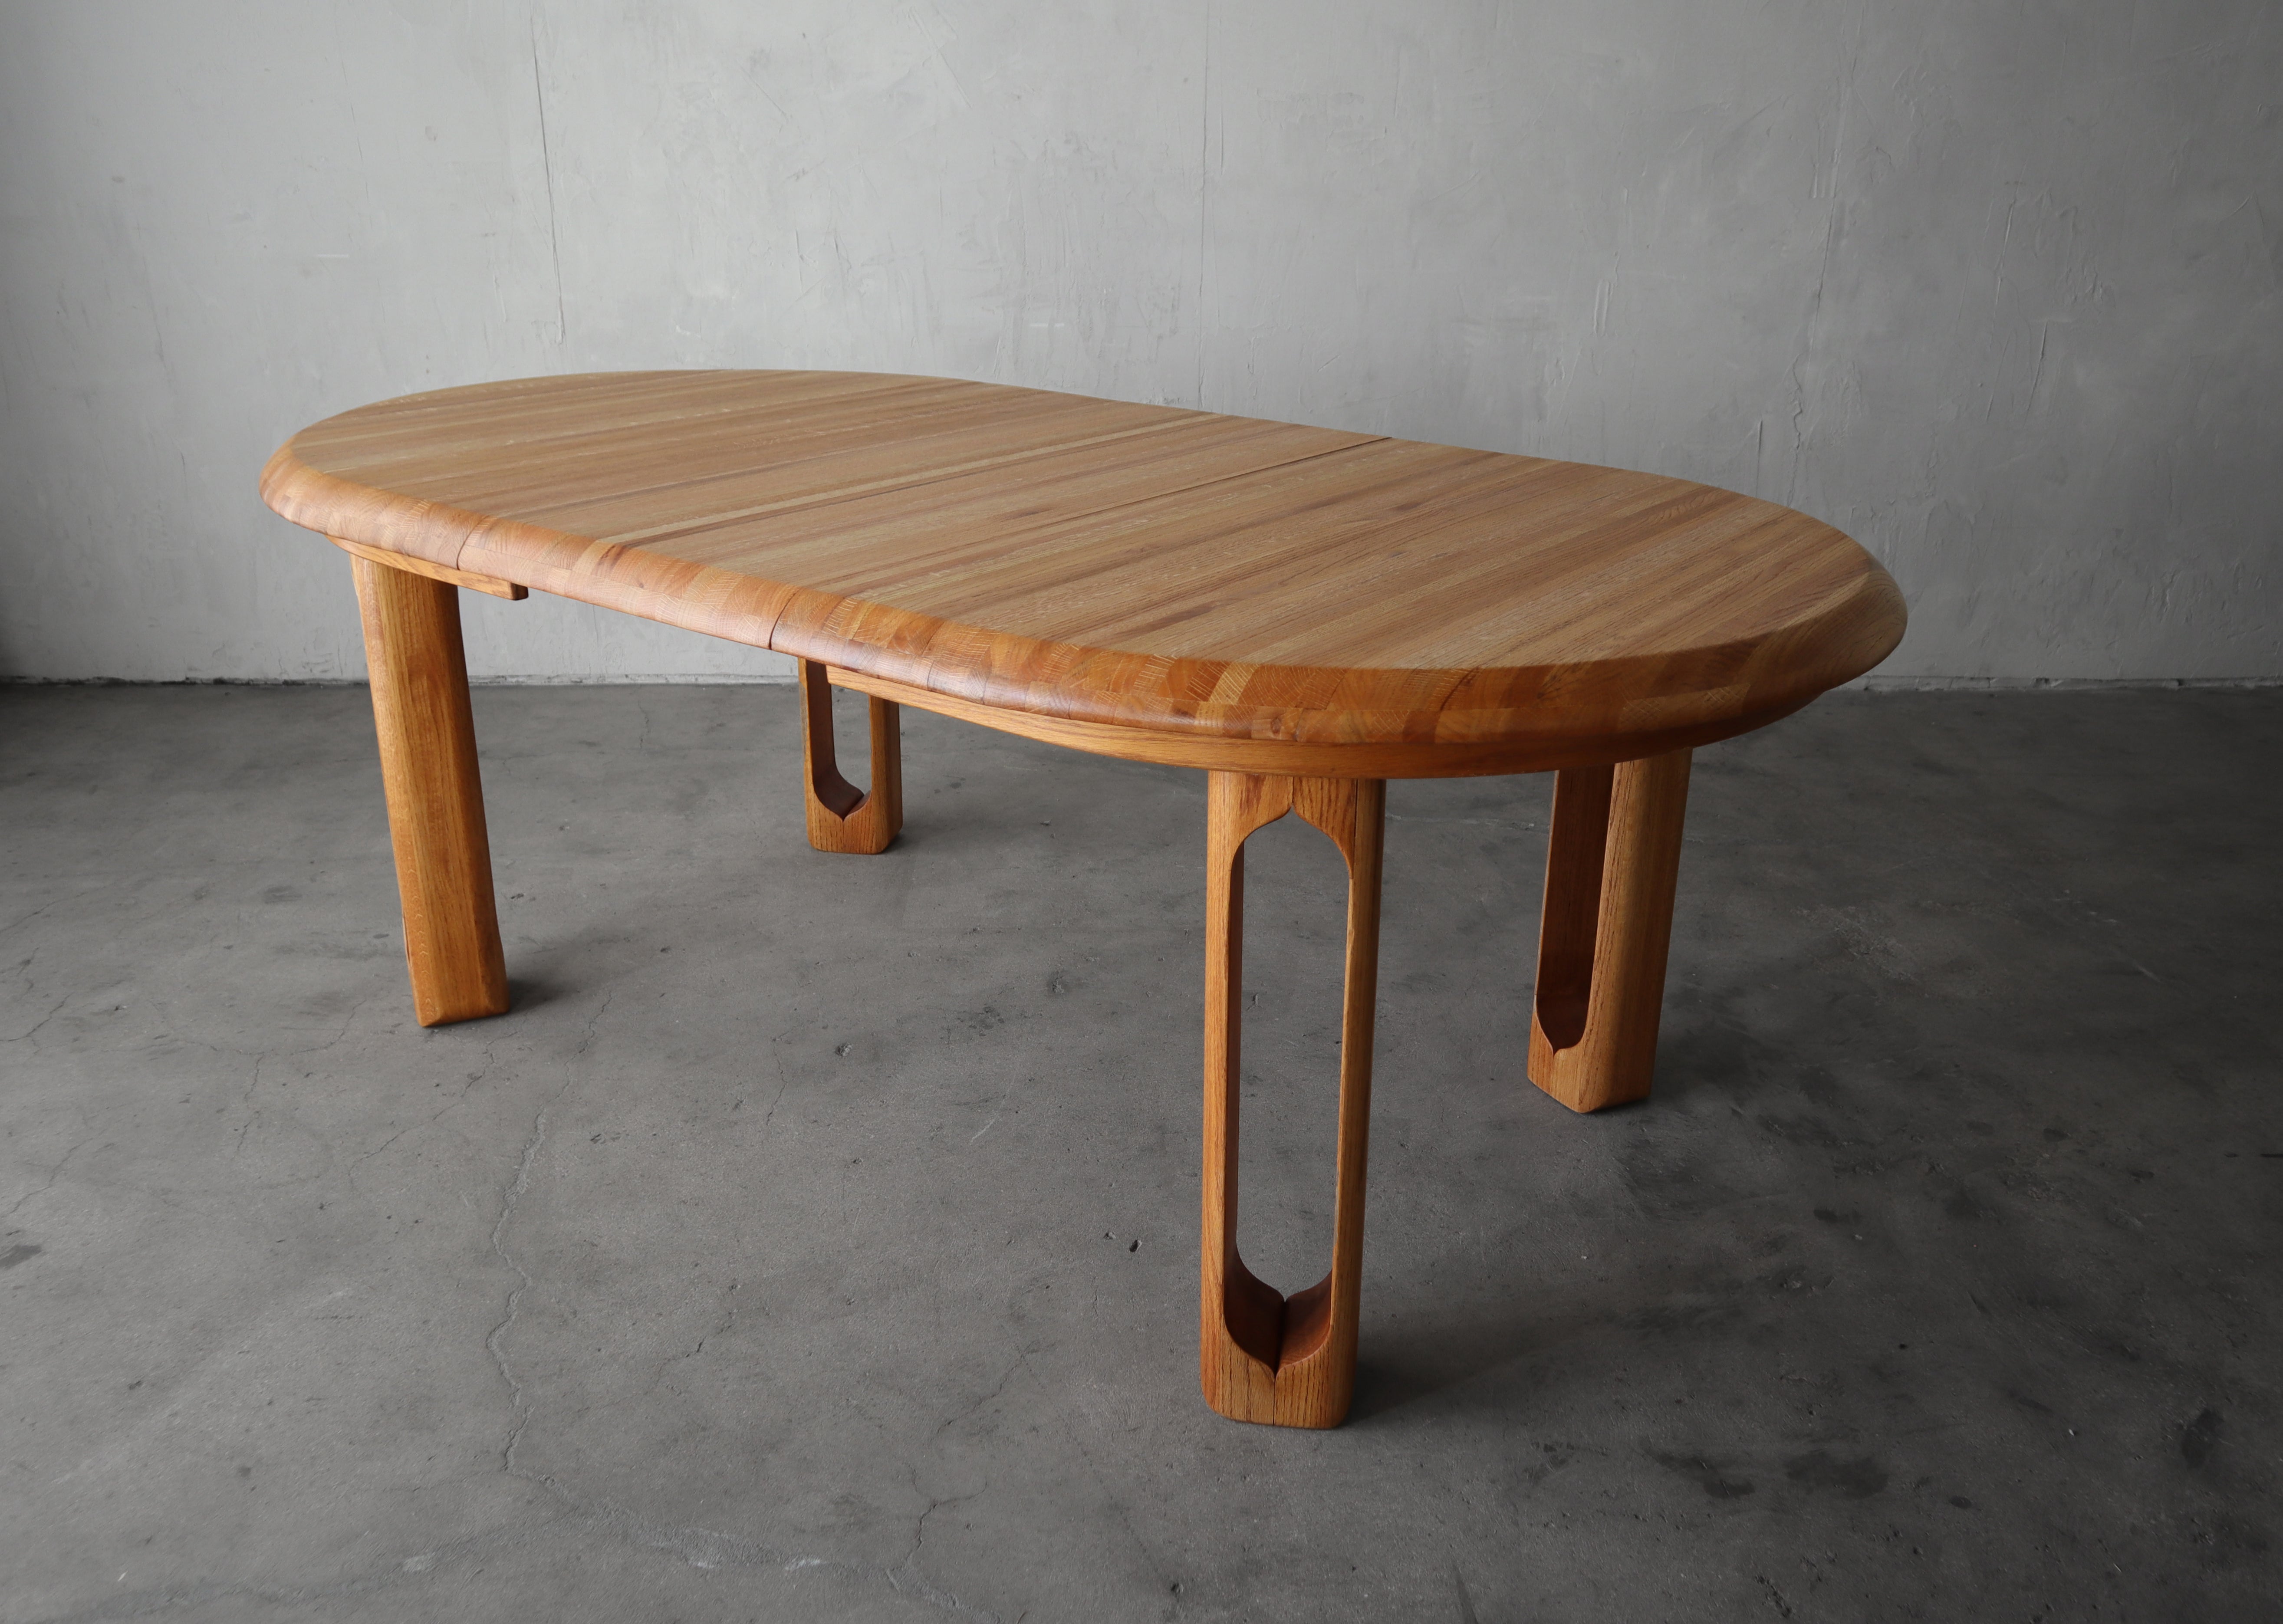 American Craftsman 1980's Solid Oak Oval Craftsman Extension Dining Table For Sale